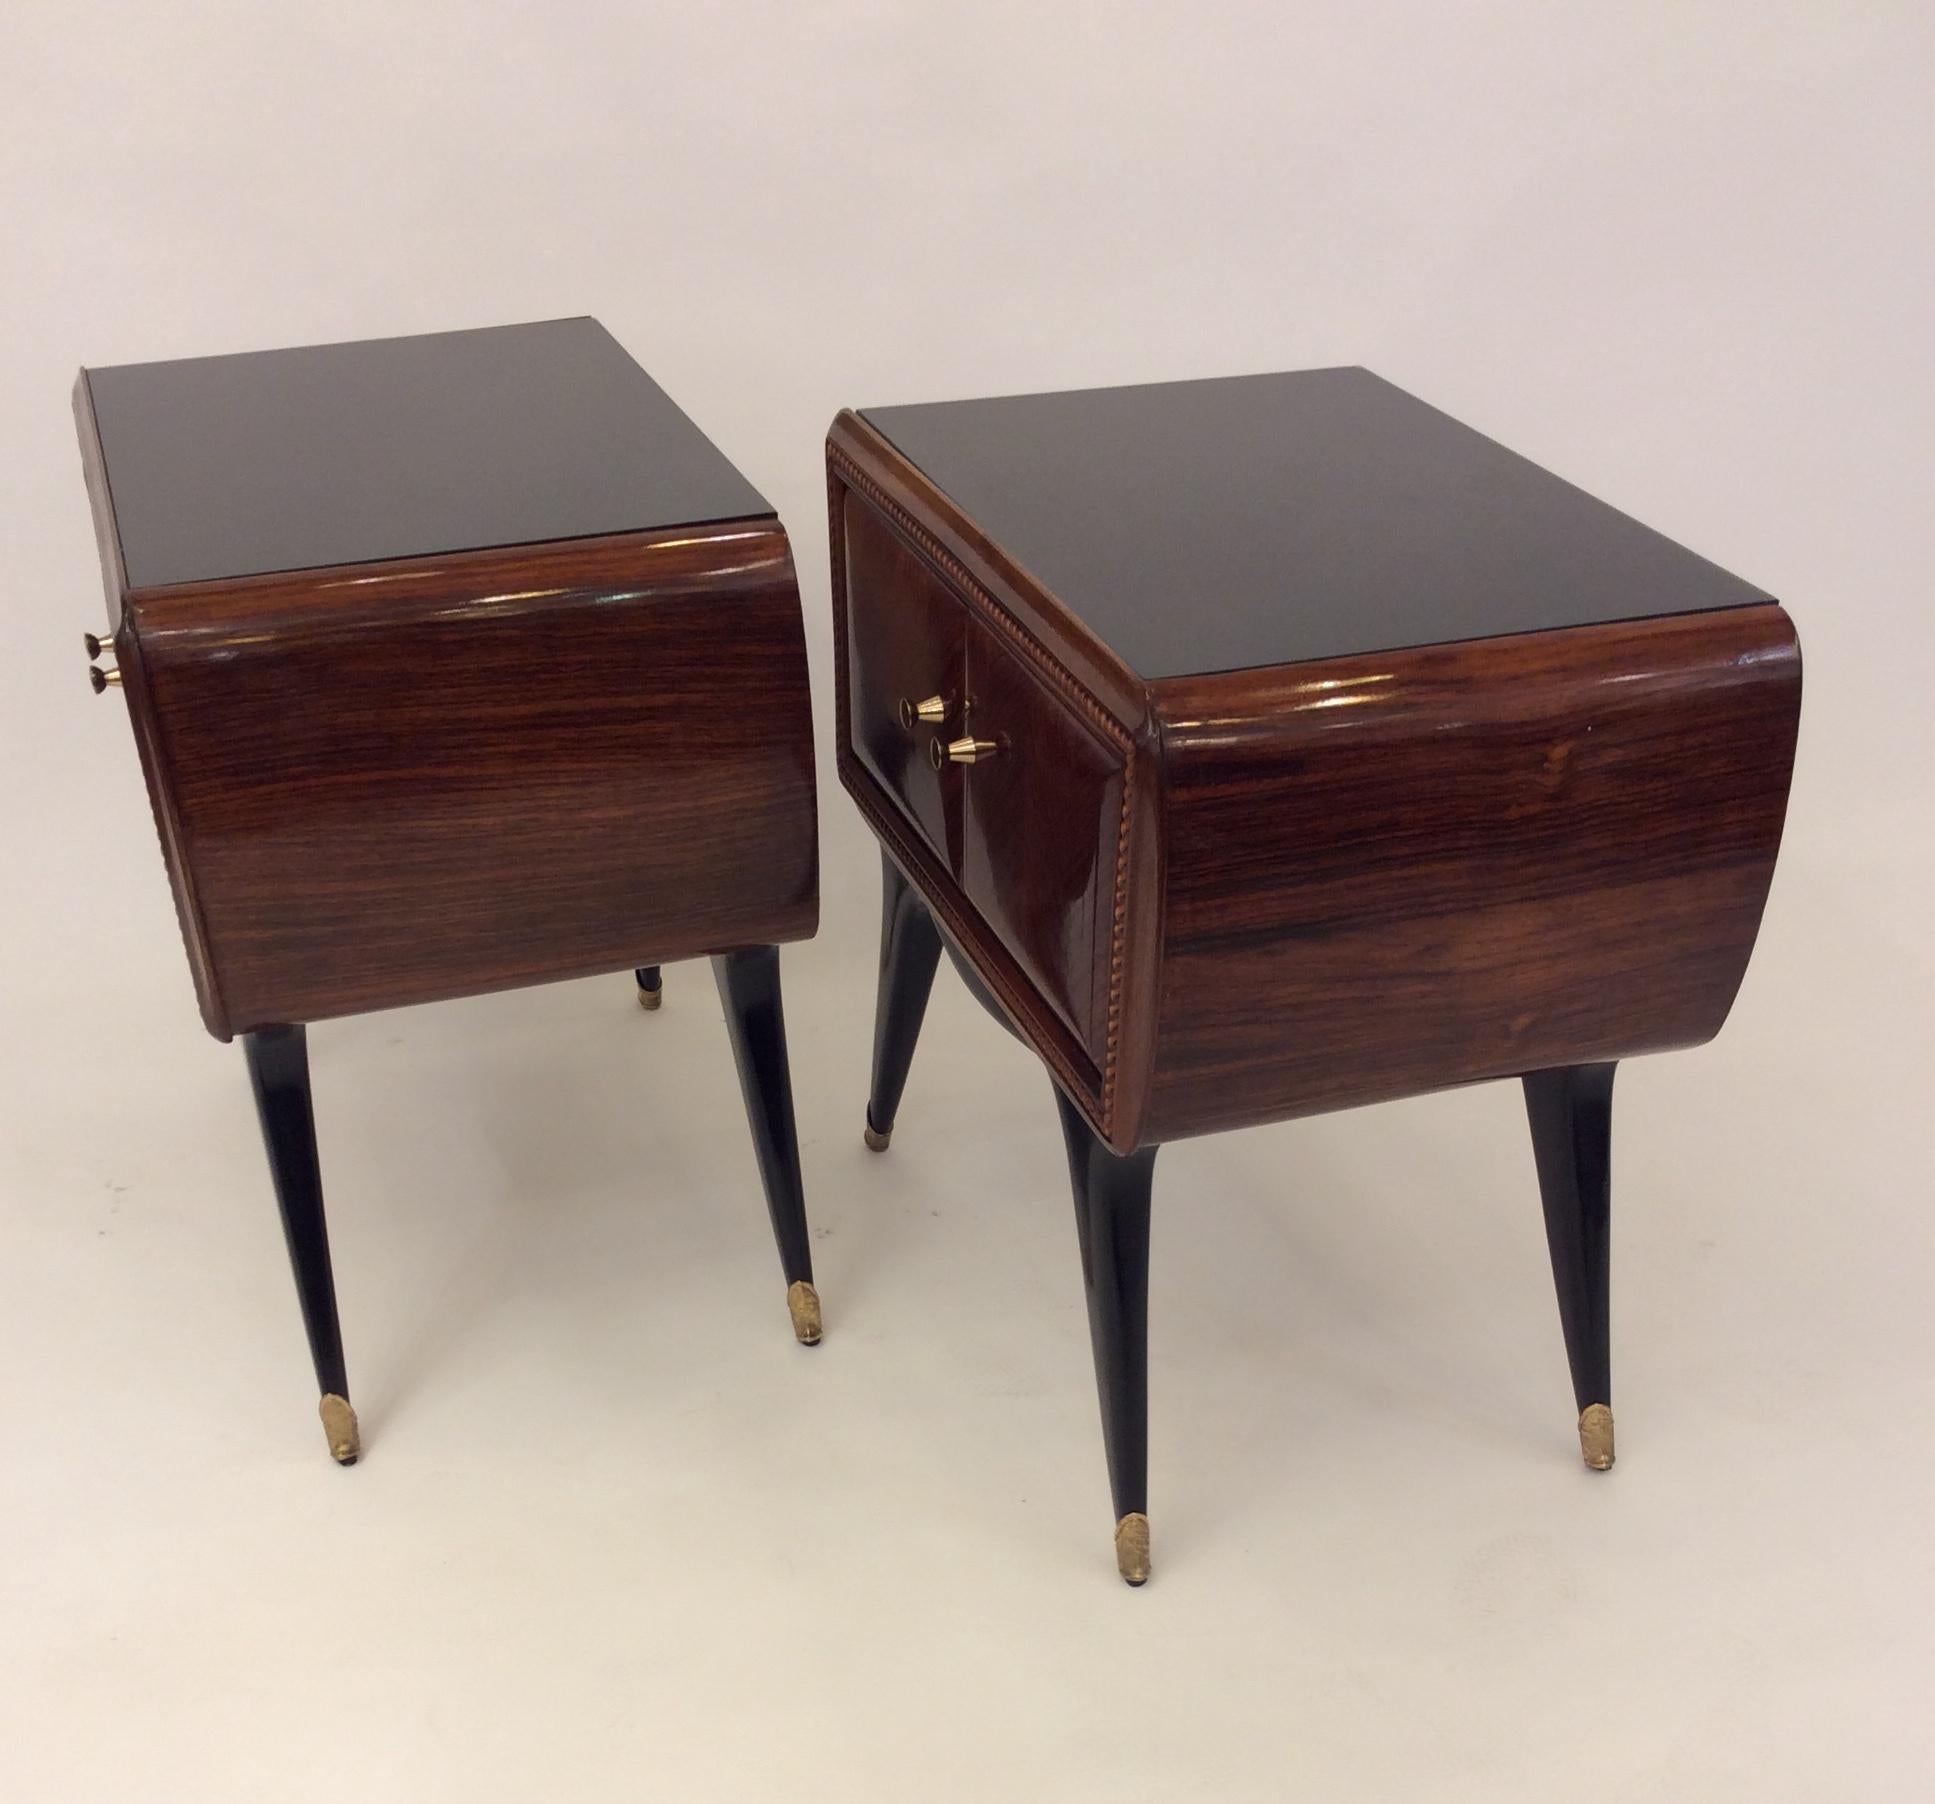 Pair of Italian Nightstands in the Style of Gio Ponti, circa 1950 For Sale 10